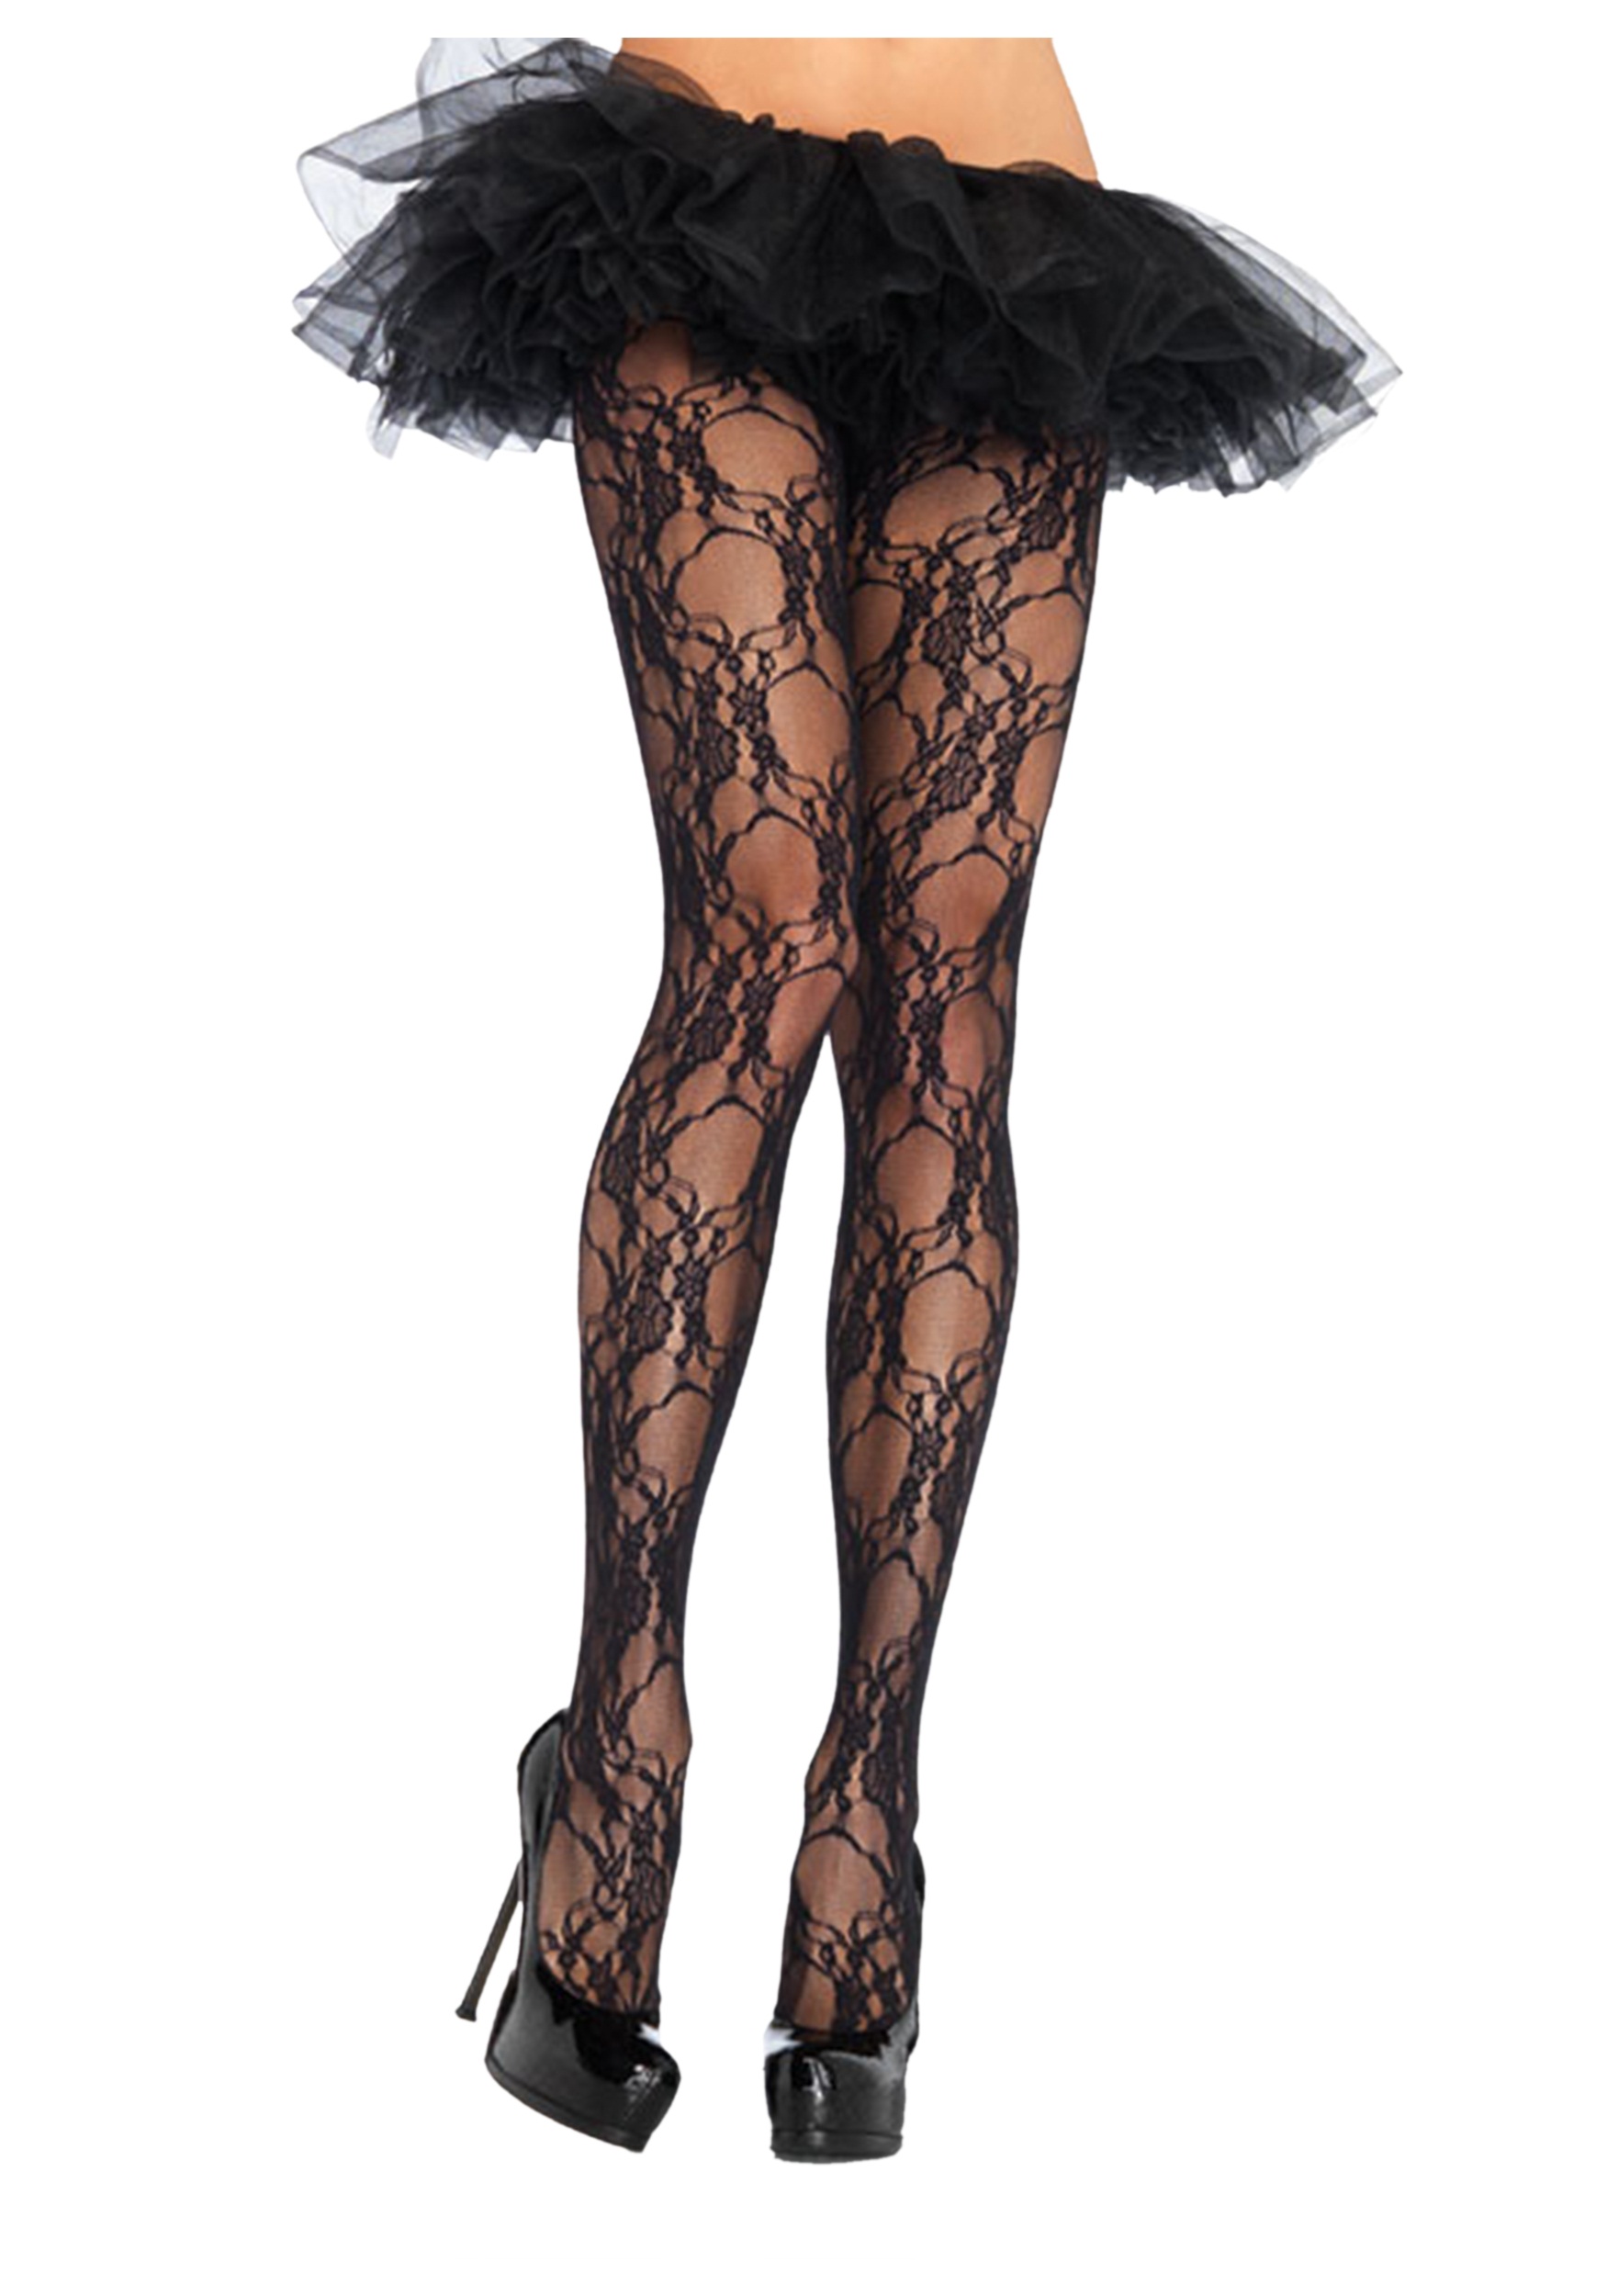 https://images.halloweencostumes.com/products/23333/1-1/floral-pantyhose.jpg